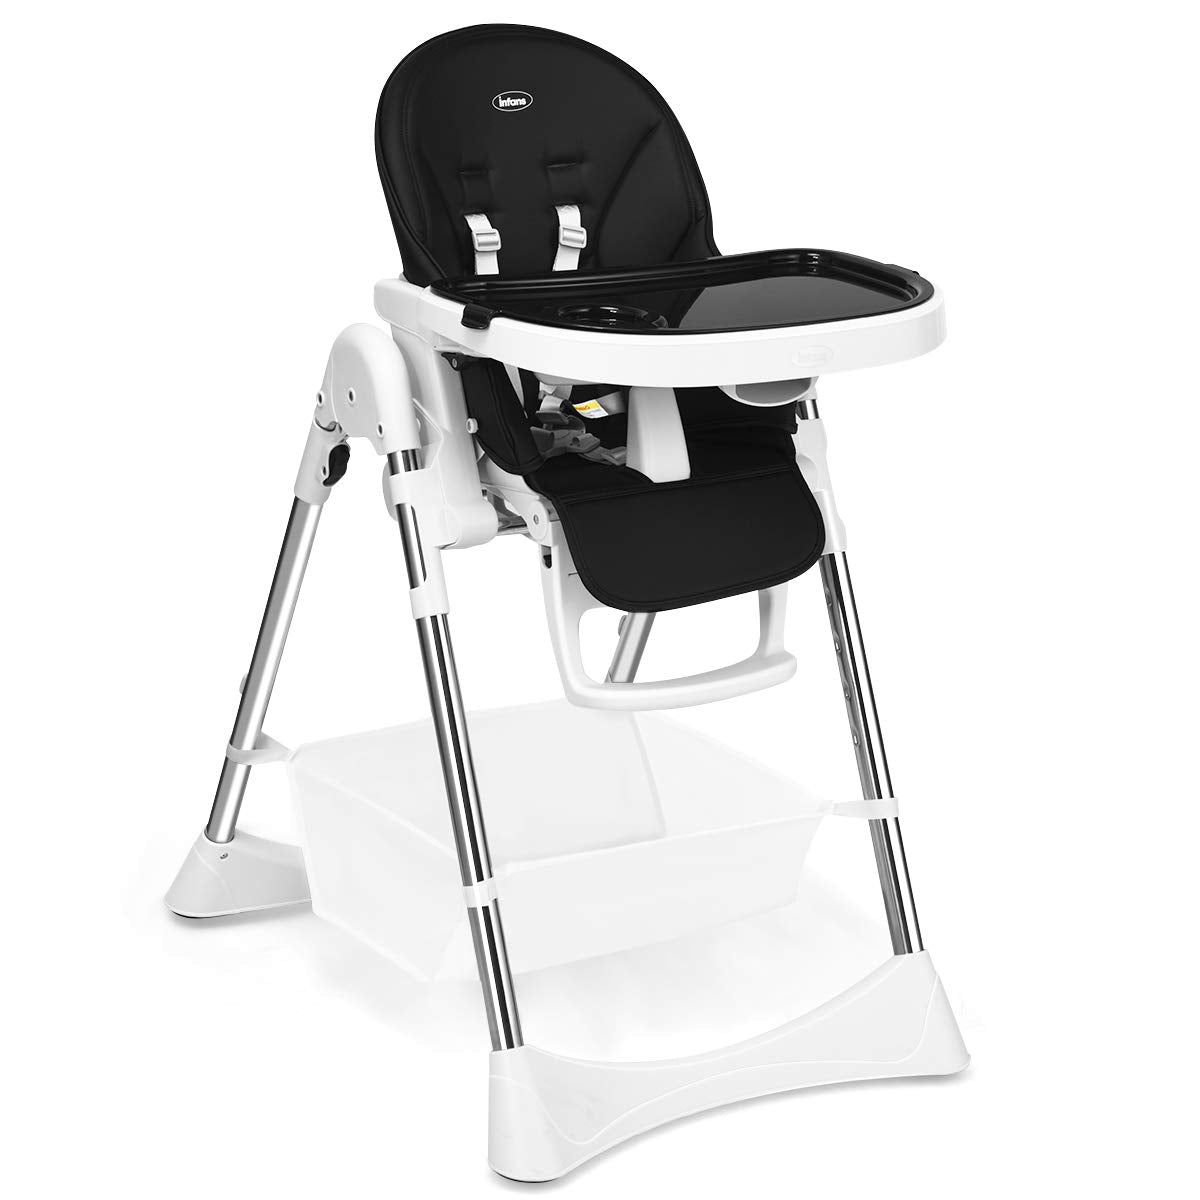 Infans Baby High Chair